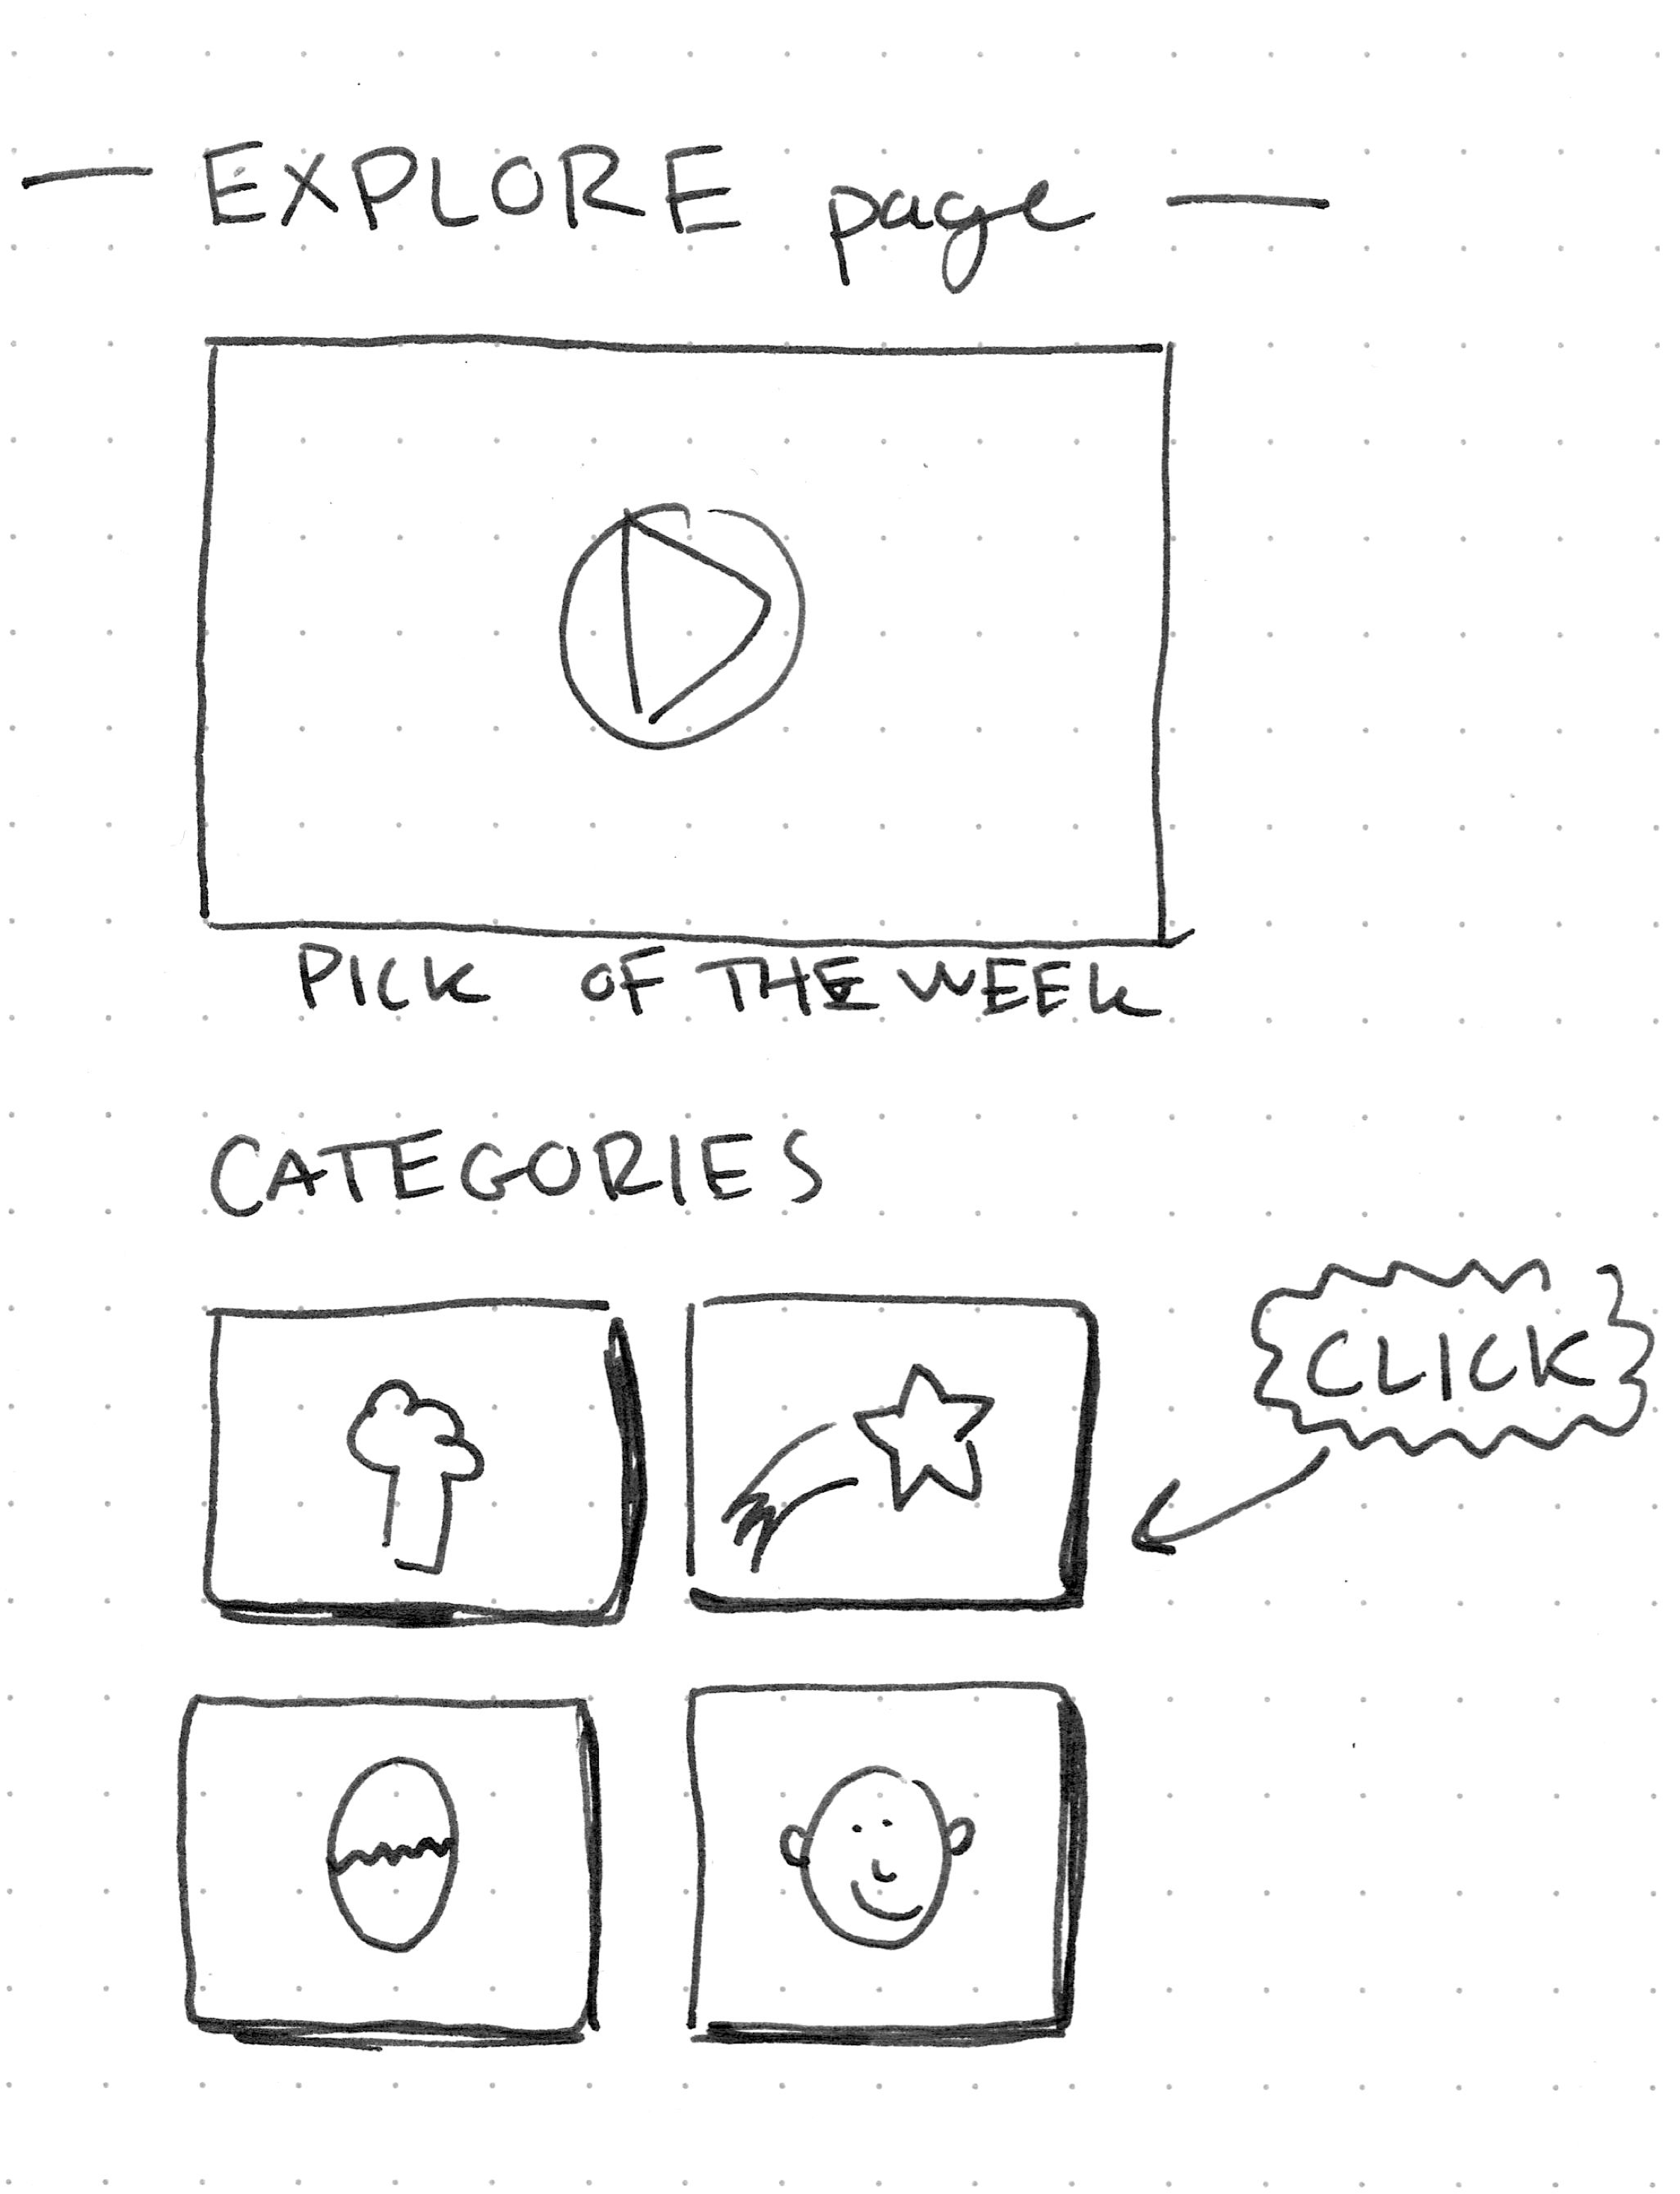  Here is a sketch of the Explore page inside our premium video library.  